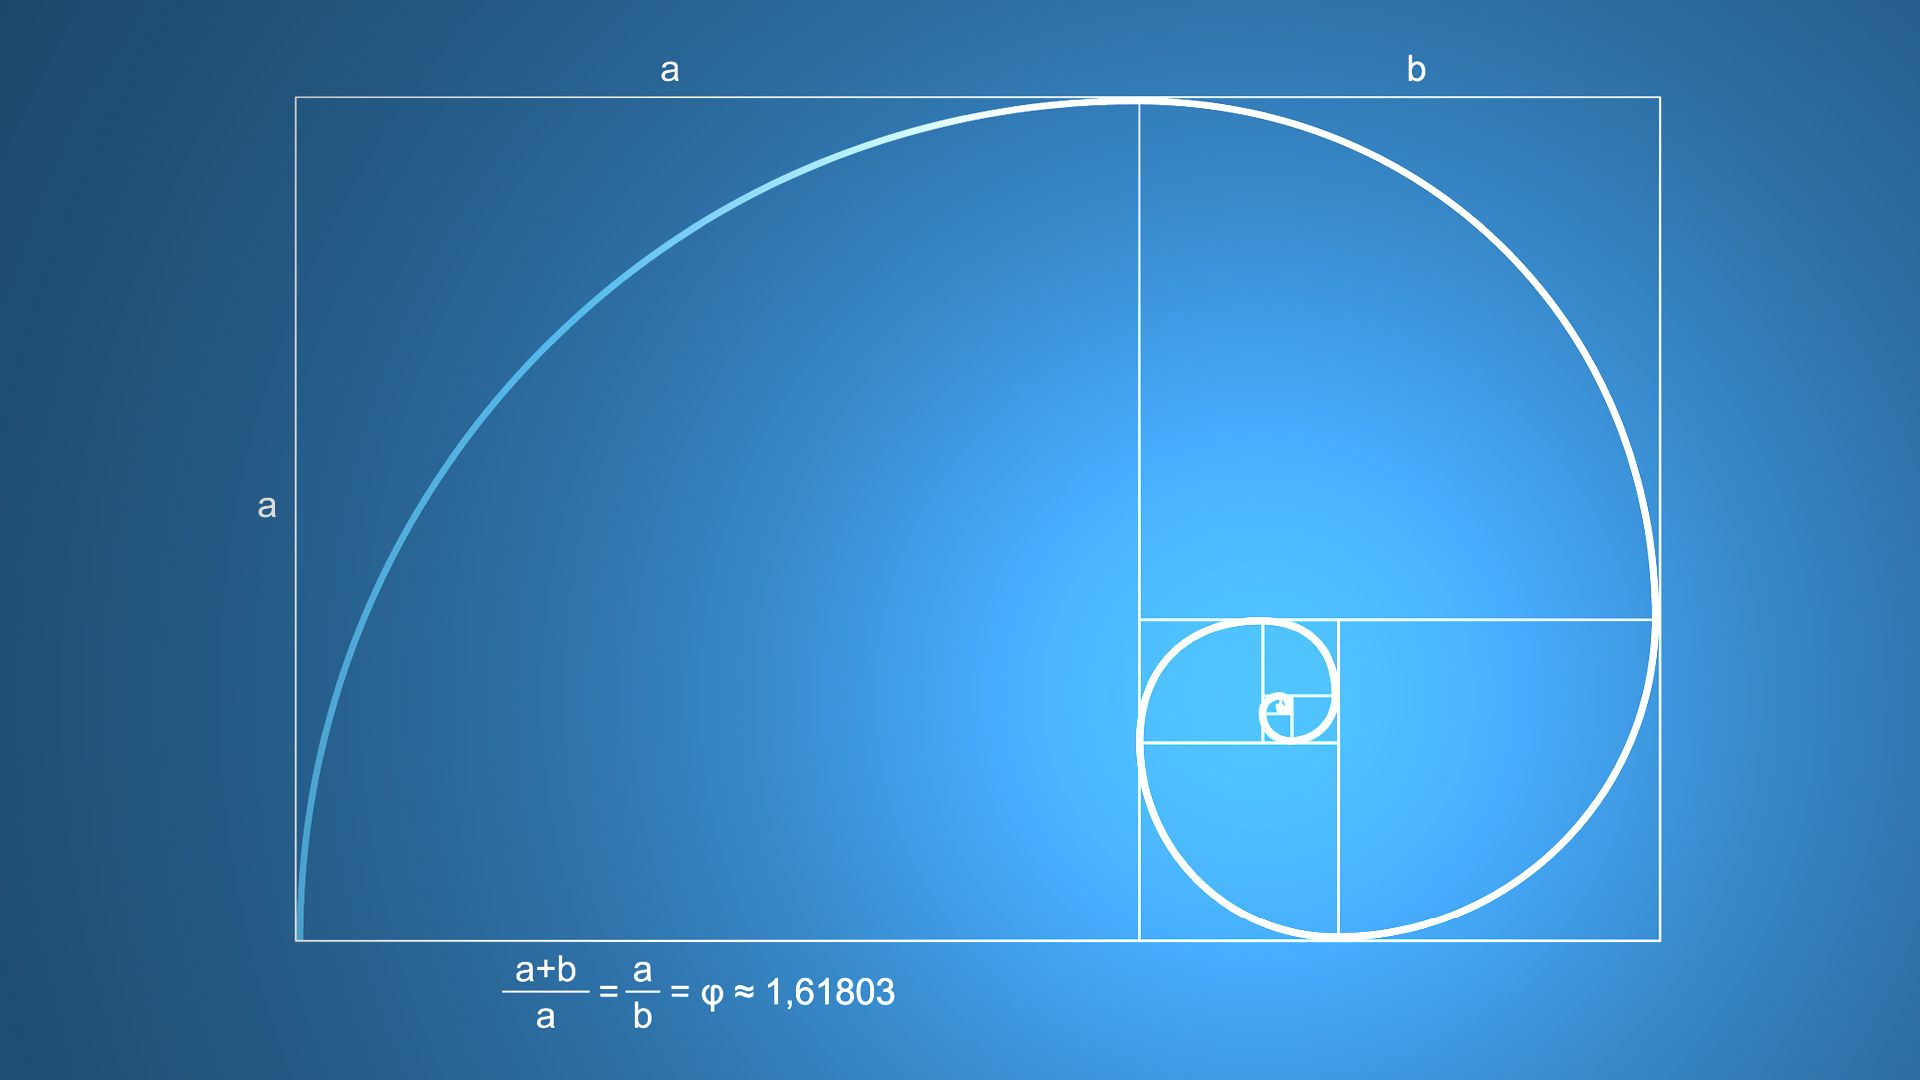 Golden Mean Ratio Shown By Graph Using Squares And